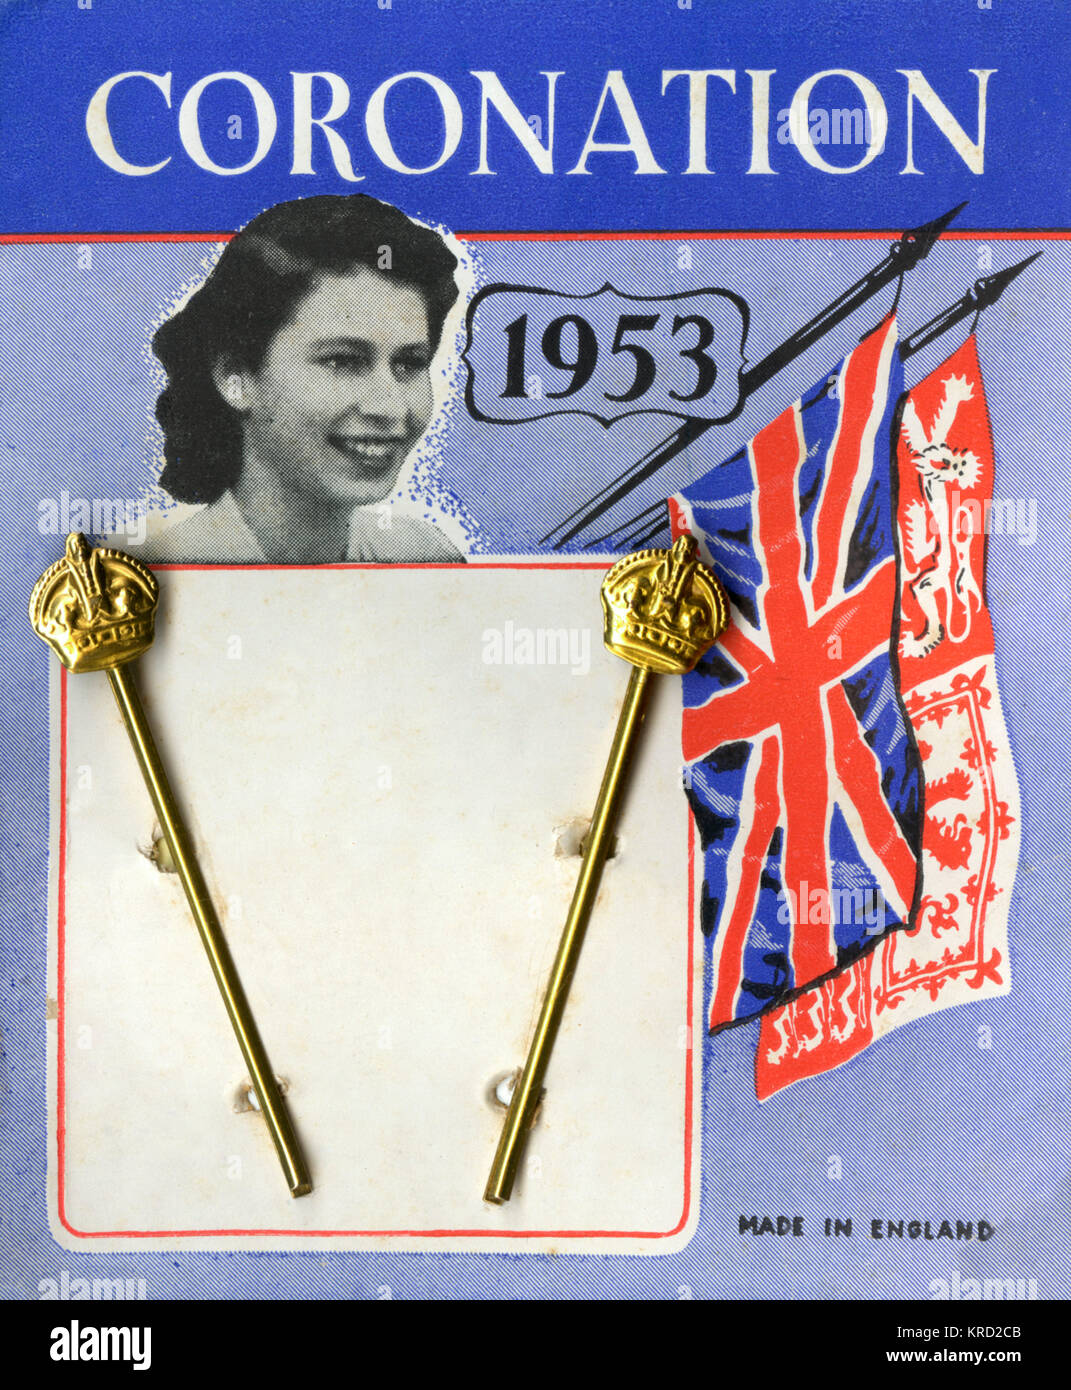 A pair of regal hair clips produced to commemorate the coronation of Queen Elizabeth II in 1953 featuring a small crown on each one and a picture of a youthful Princess Elizabeth on the packaging.     Date: 1953 Stock Photo